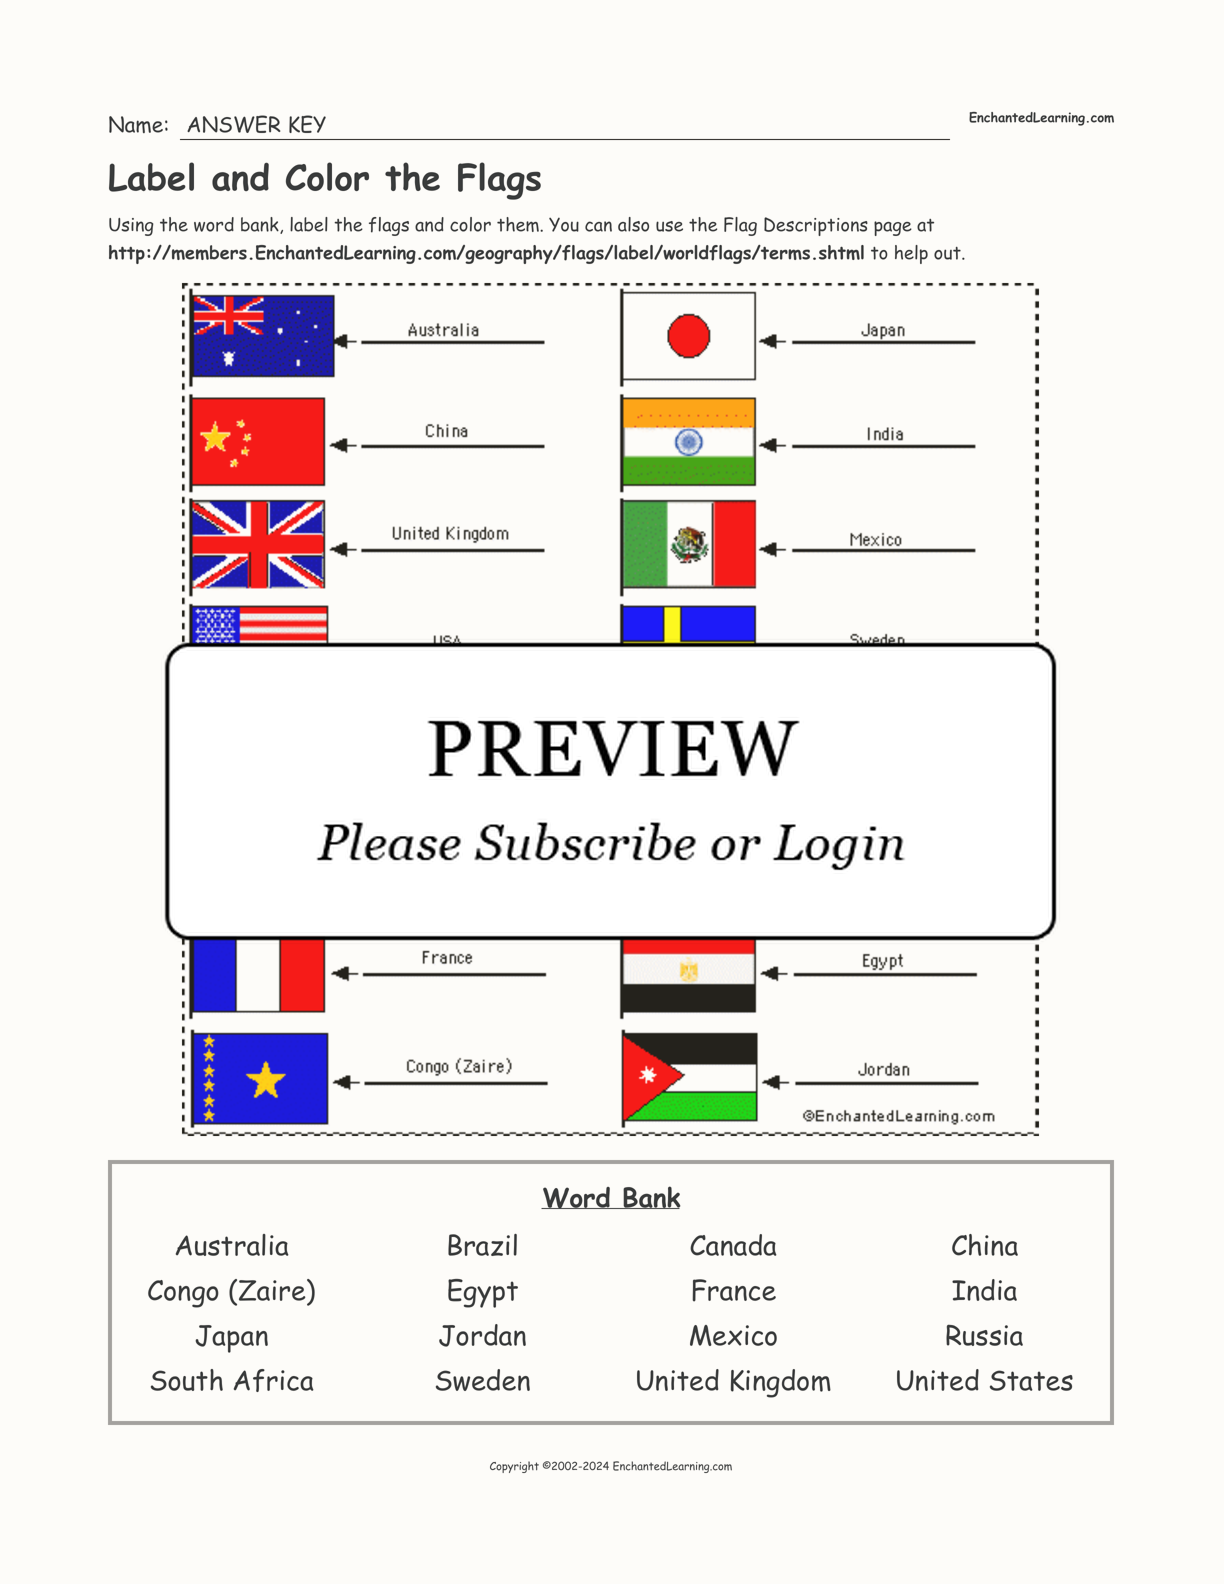 Label and Color the Flags interactive worksheet page 2